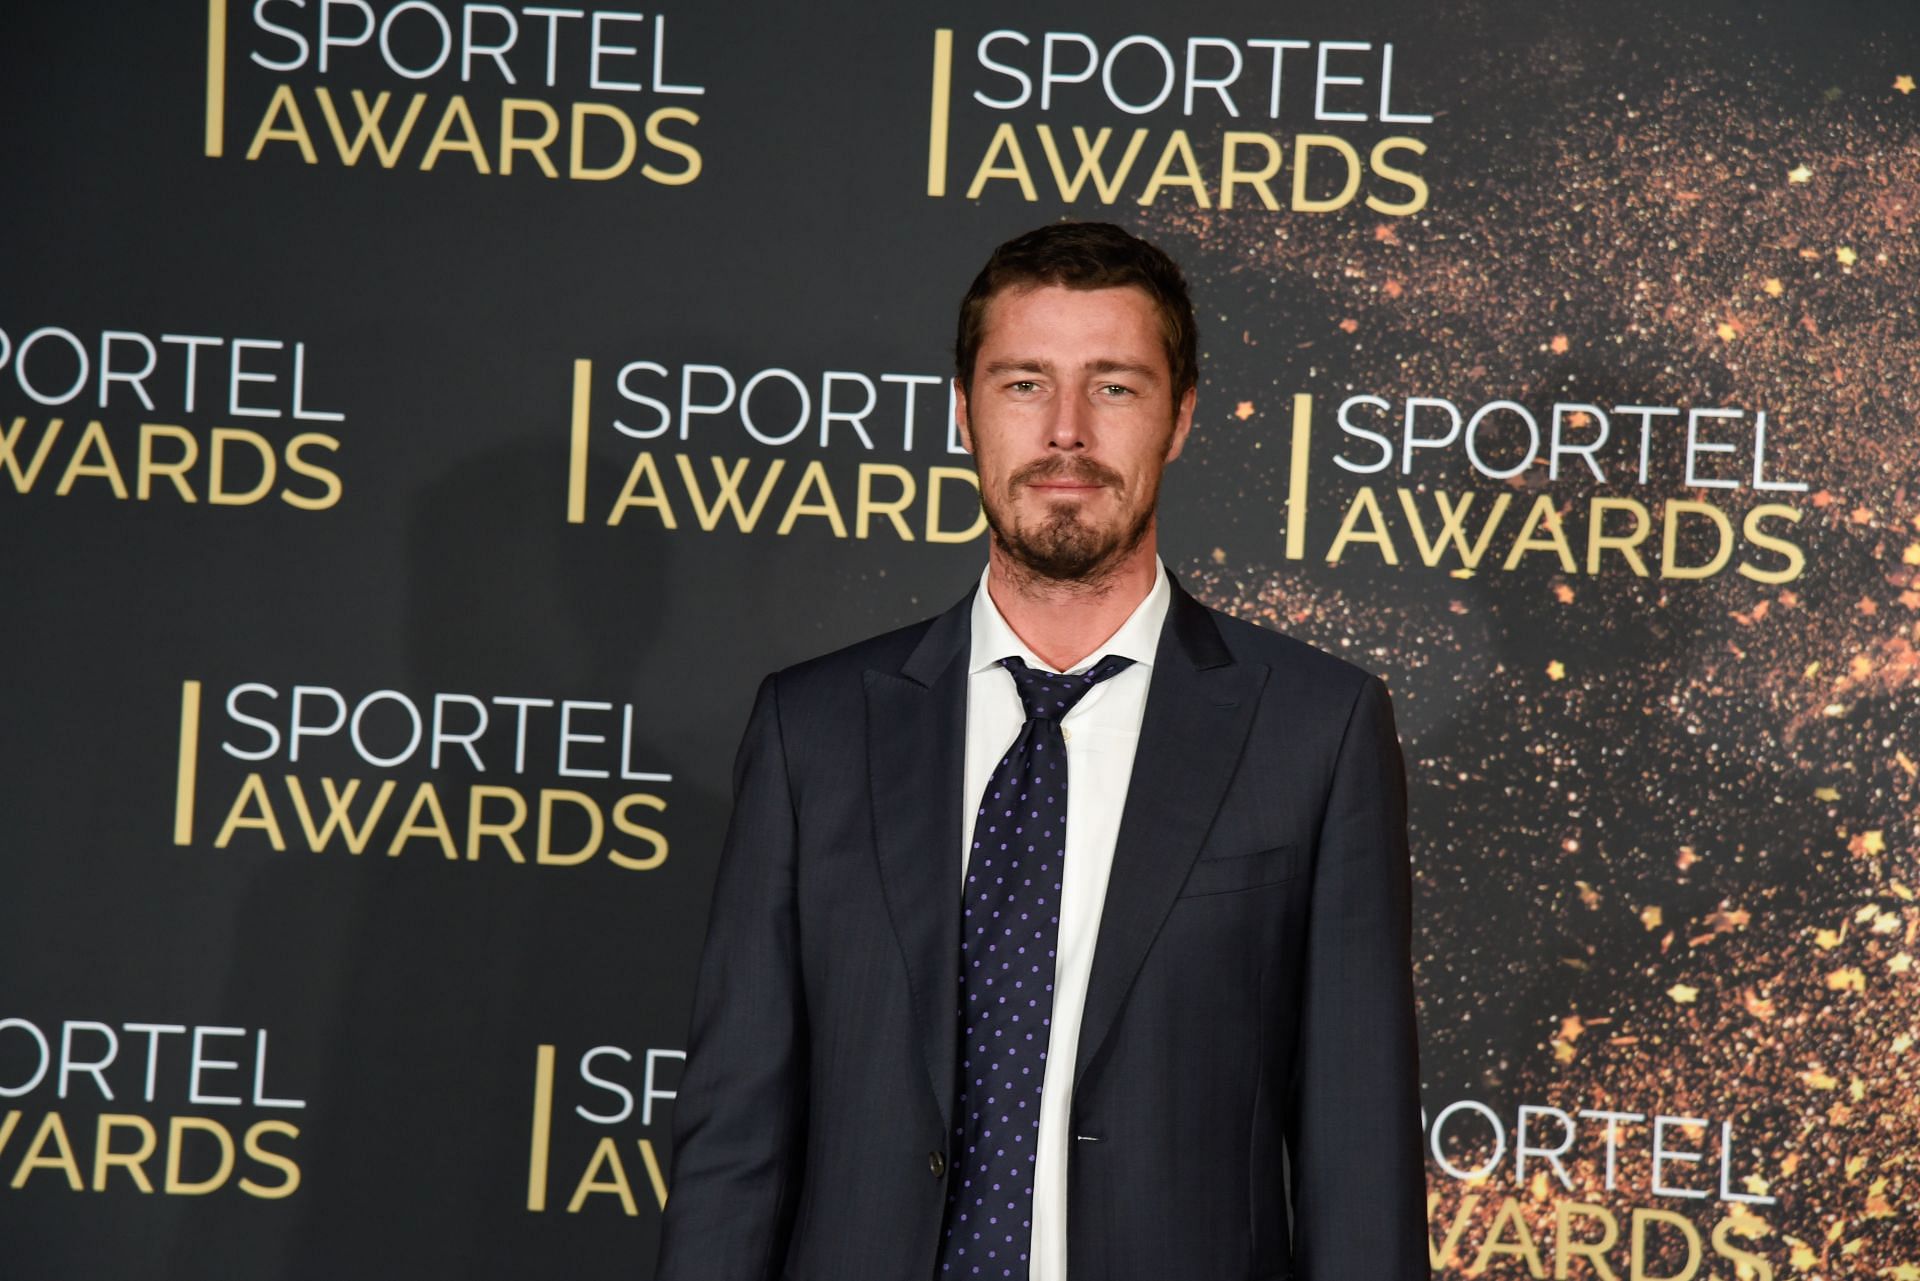 Marat Safin won both of his encounters against the 20-time Grand Slam champion